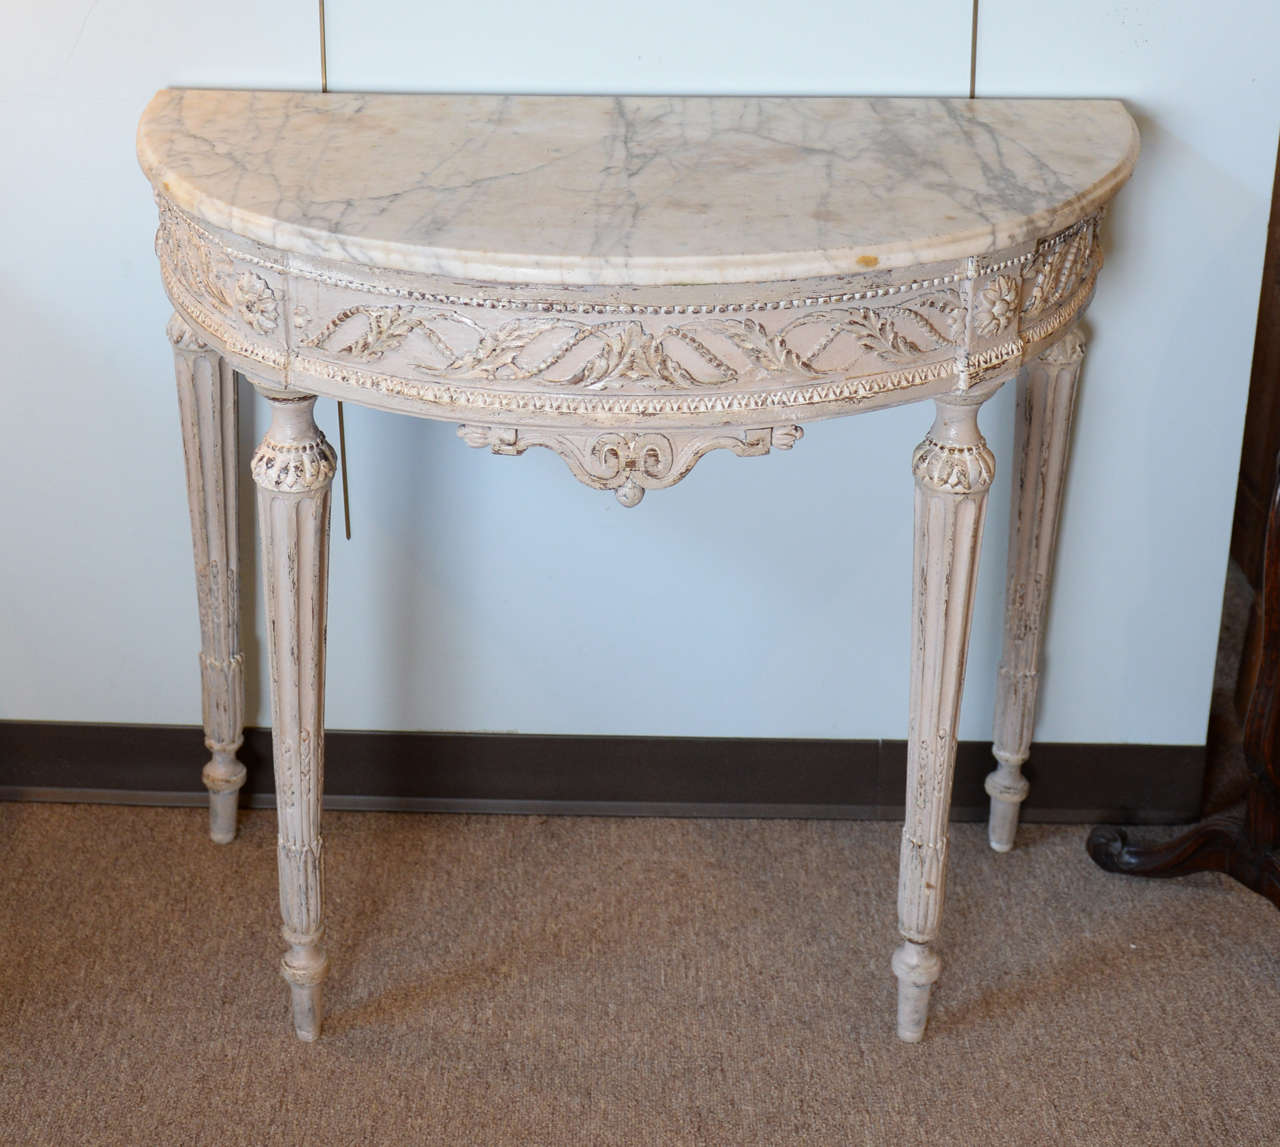 18th Century Louis XVI Style Console with Marble Top, Circa 1780
Frequently we have clients looking for small pieces for an entrance hall or other special spot.  This is a show stopper for a small space with the great carving, light color, and nice